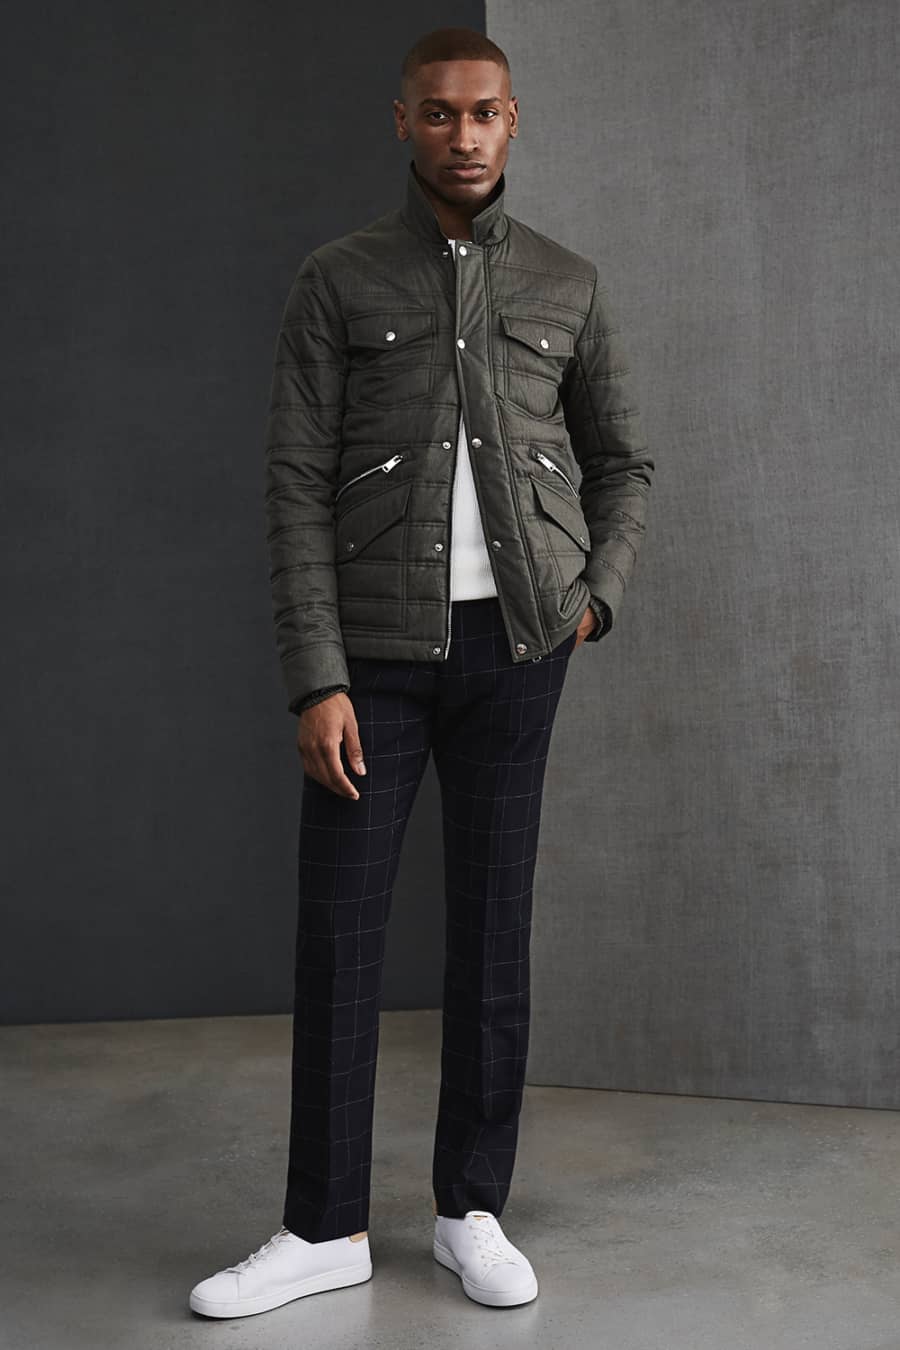 Men's dark checked trousers, white T-shirt and padded field jacket outfit